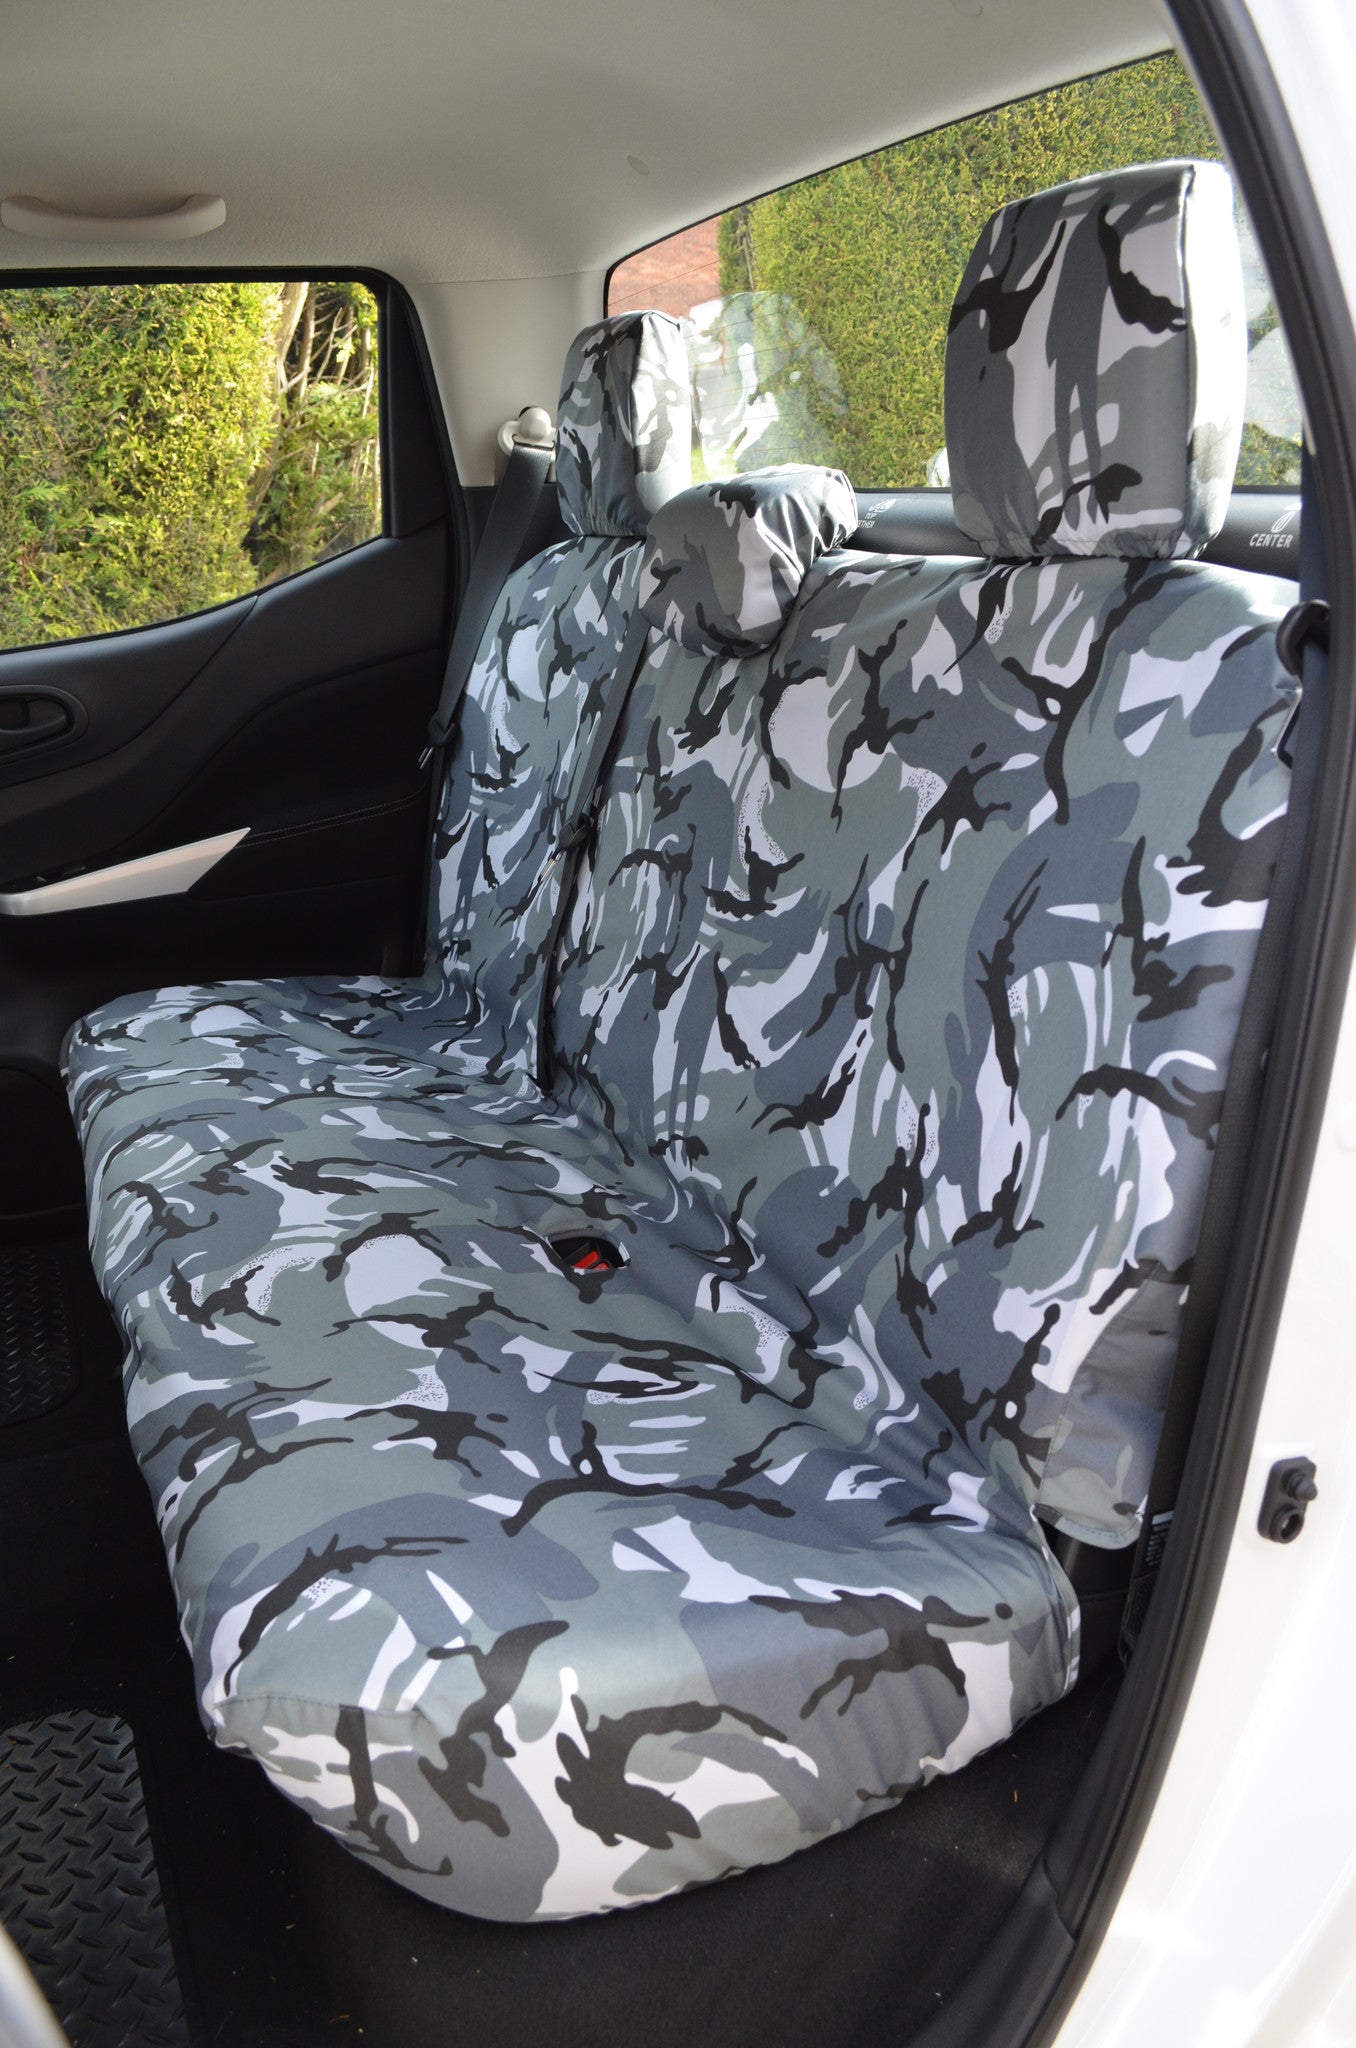 Complete Genuine Leather Covers Nissan Qashqai from 2014 onwards Seat